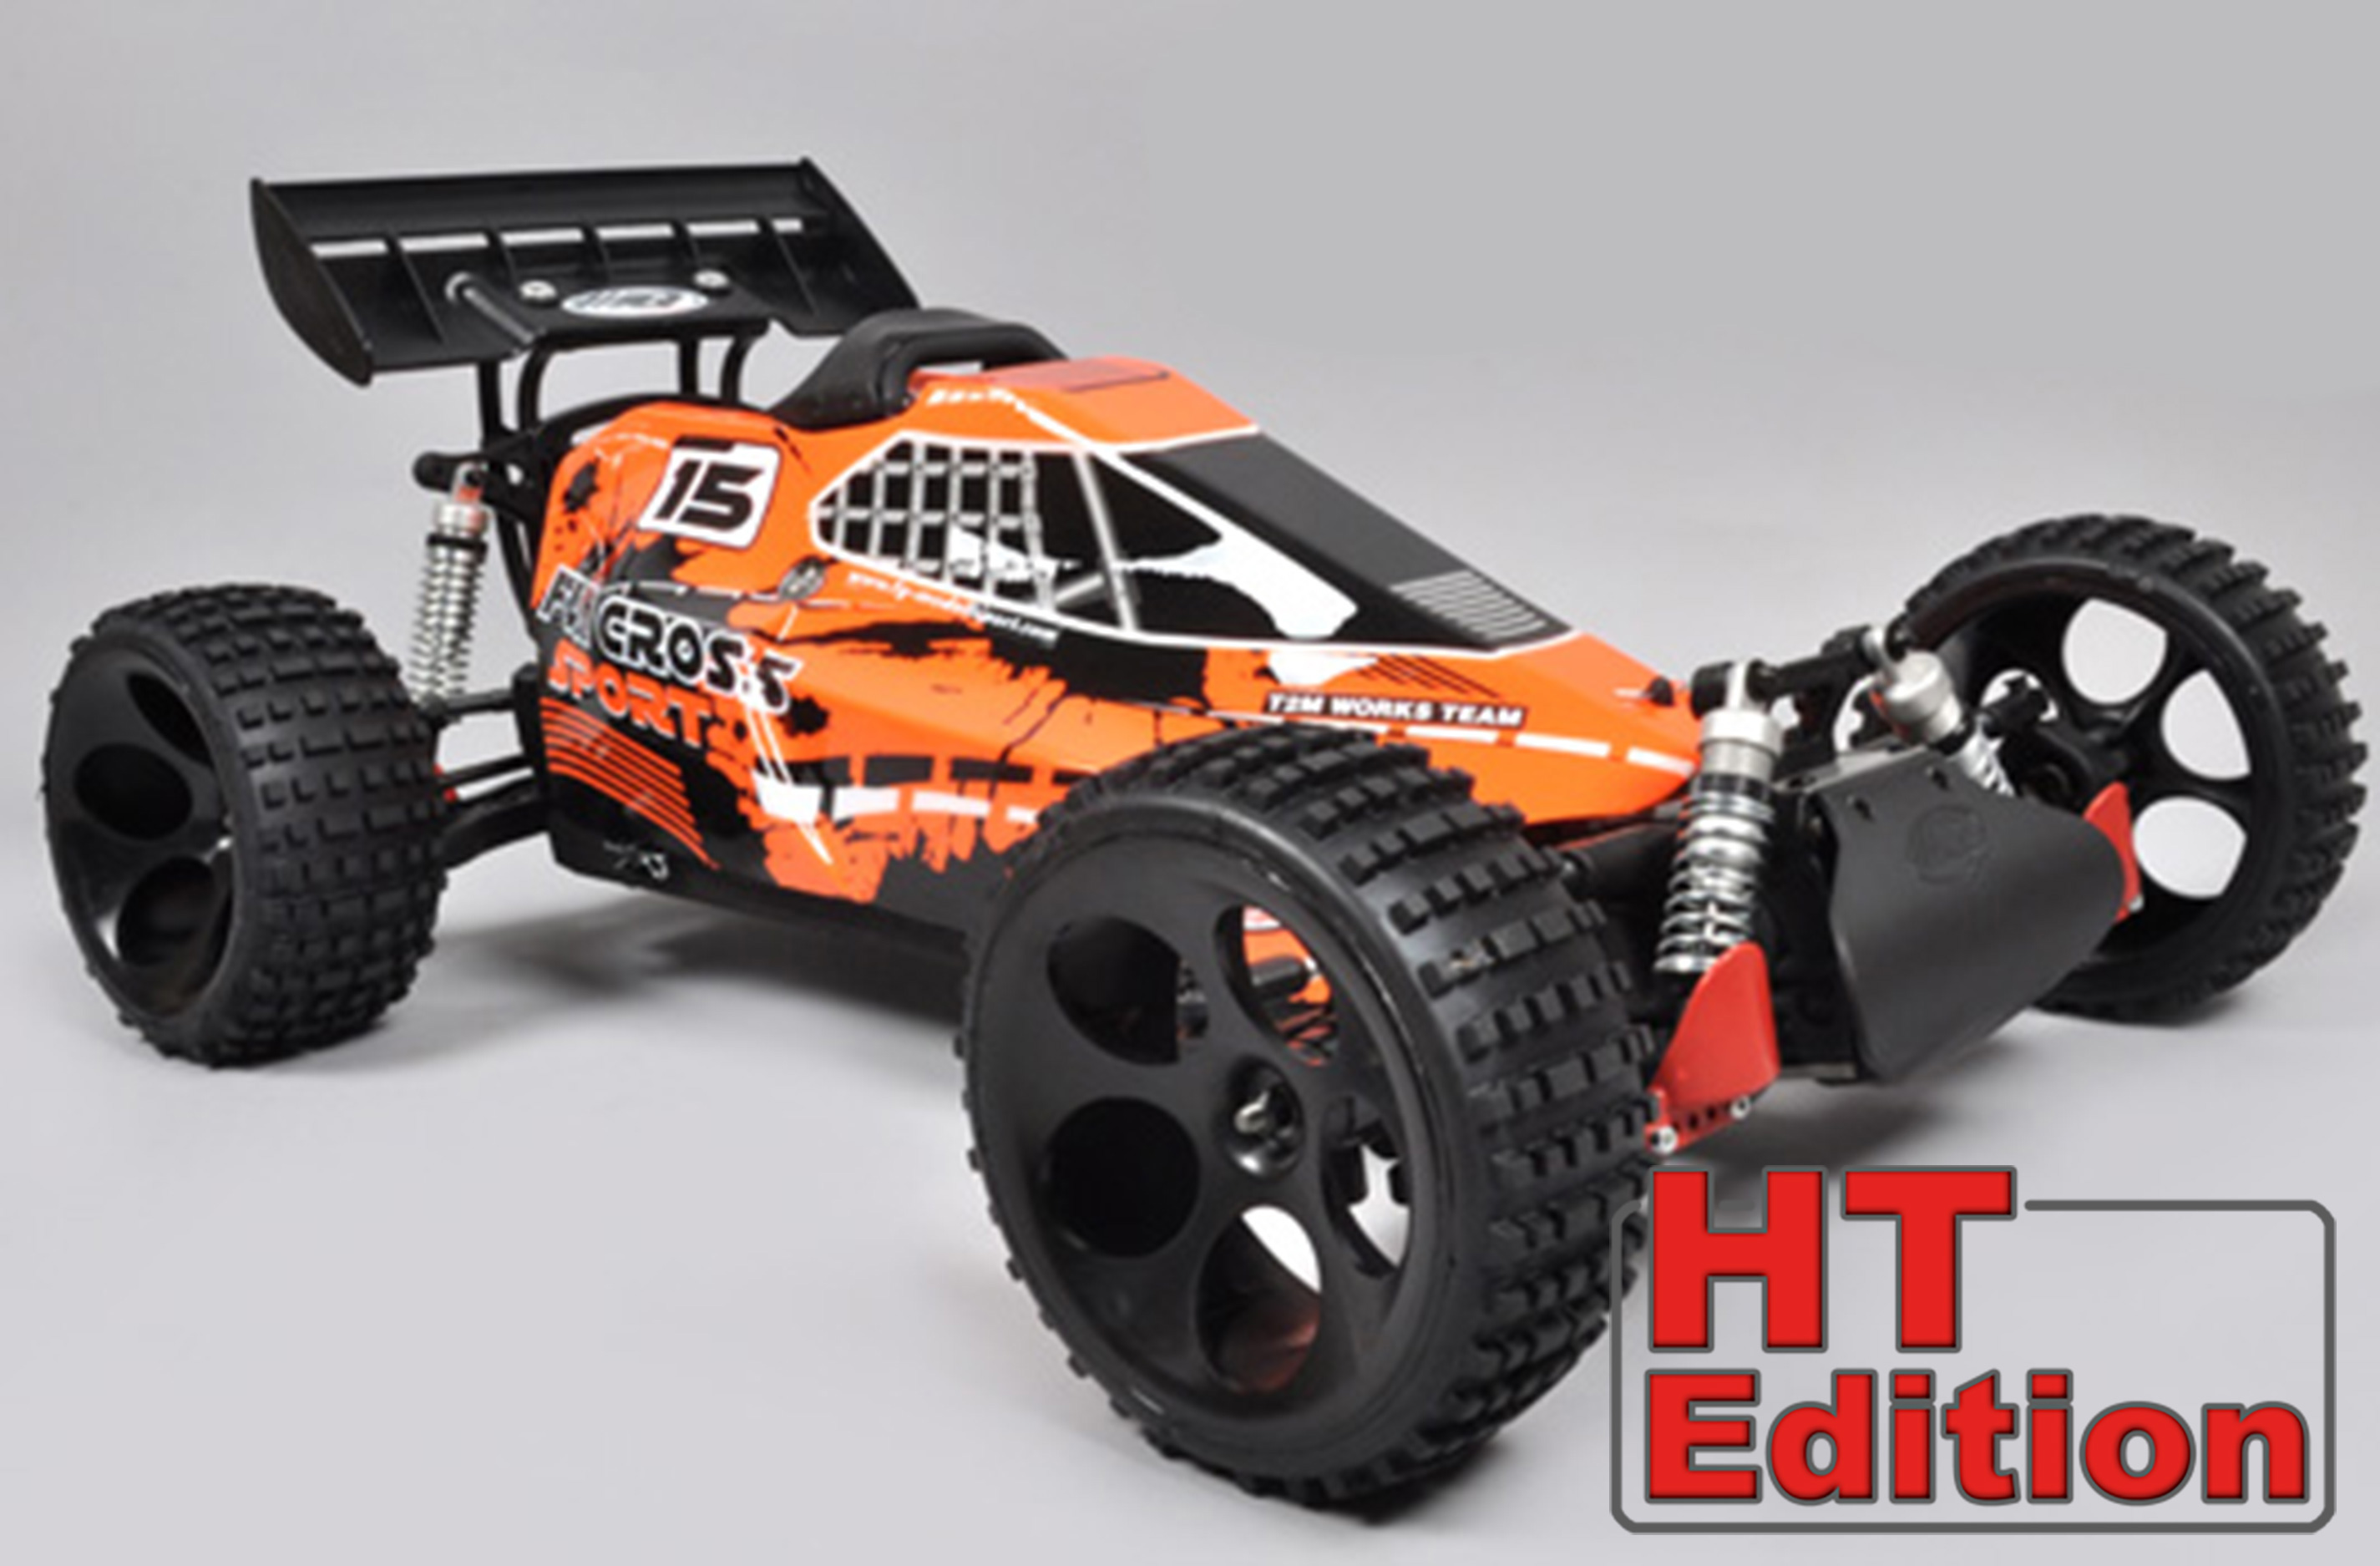 670070 Fun Cross Sport 2WD HT-Edition with painted Body Shell